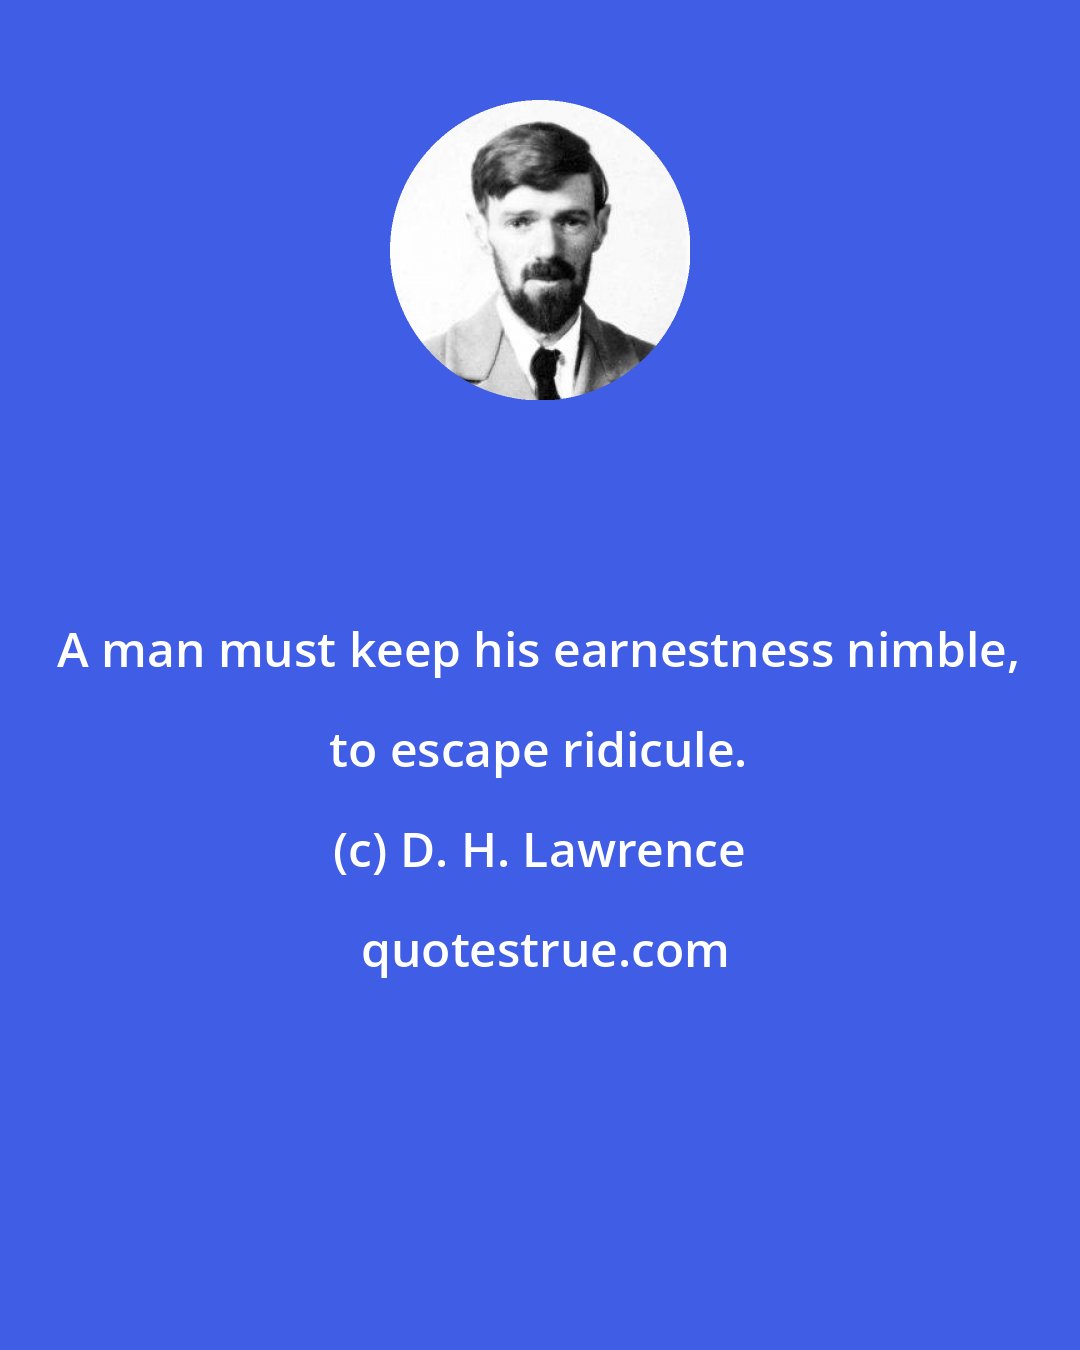 D. H. Lawrence: A man must keep his earnestness nimble, to escape ridicule.